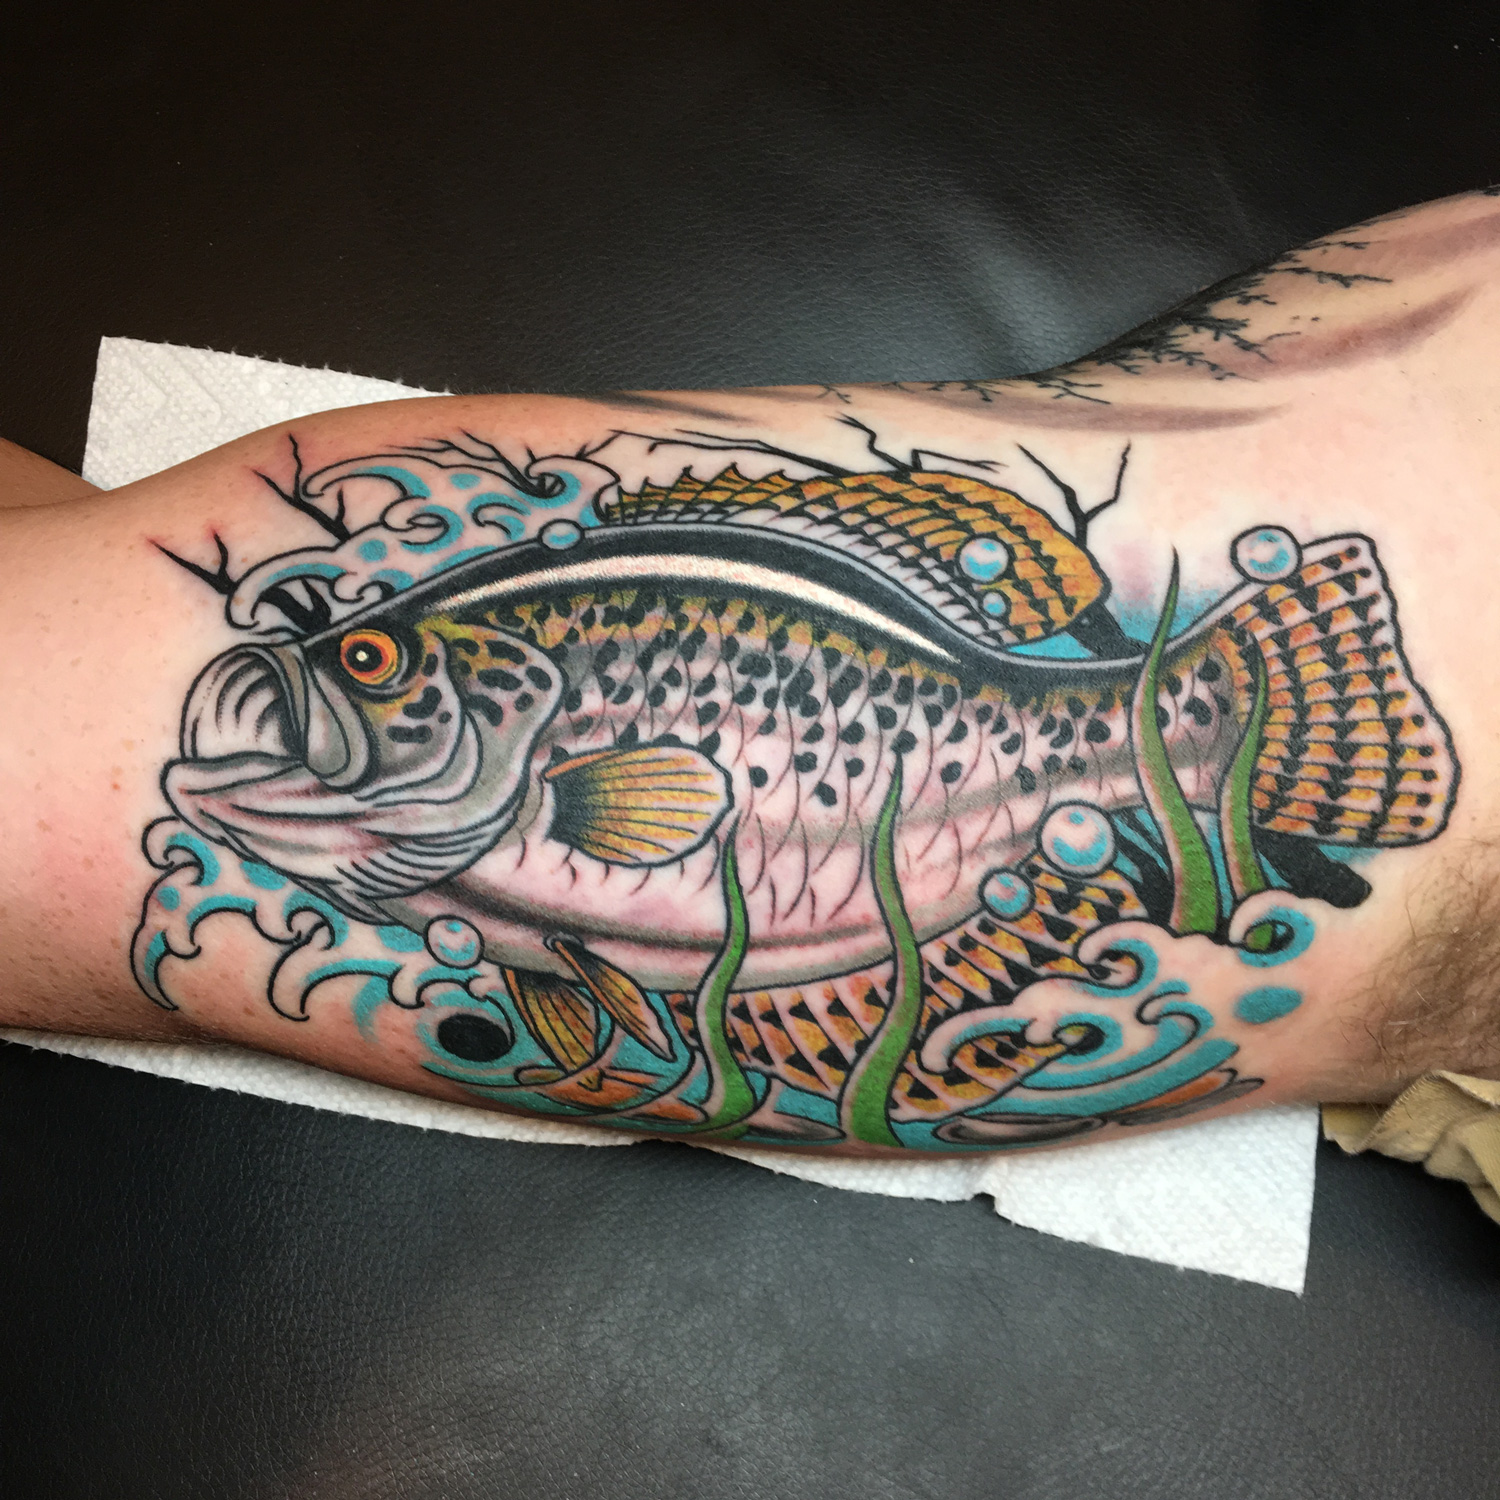 César De Cesaro on Twitter Another fish another trout Another  trouttattoo tattoo httptcoC6ZB7cJwMD  Twitter